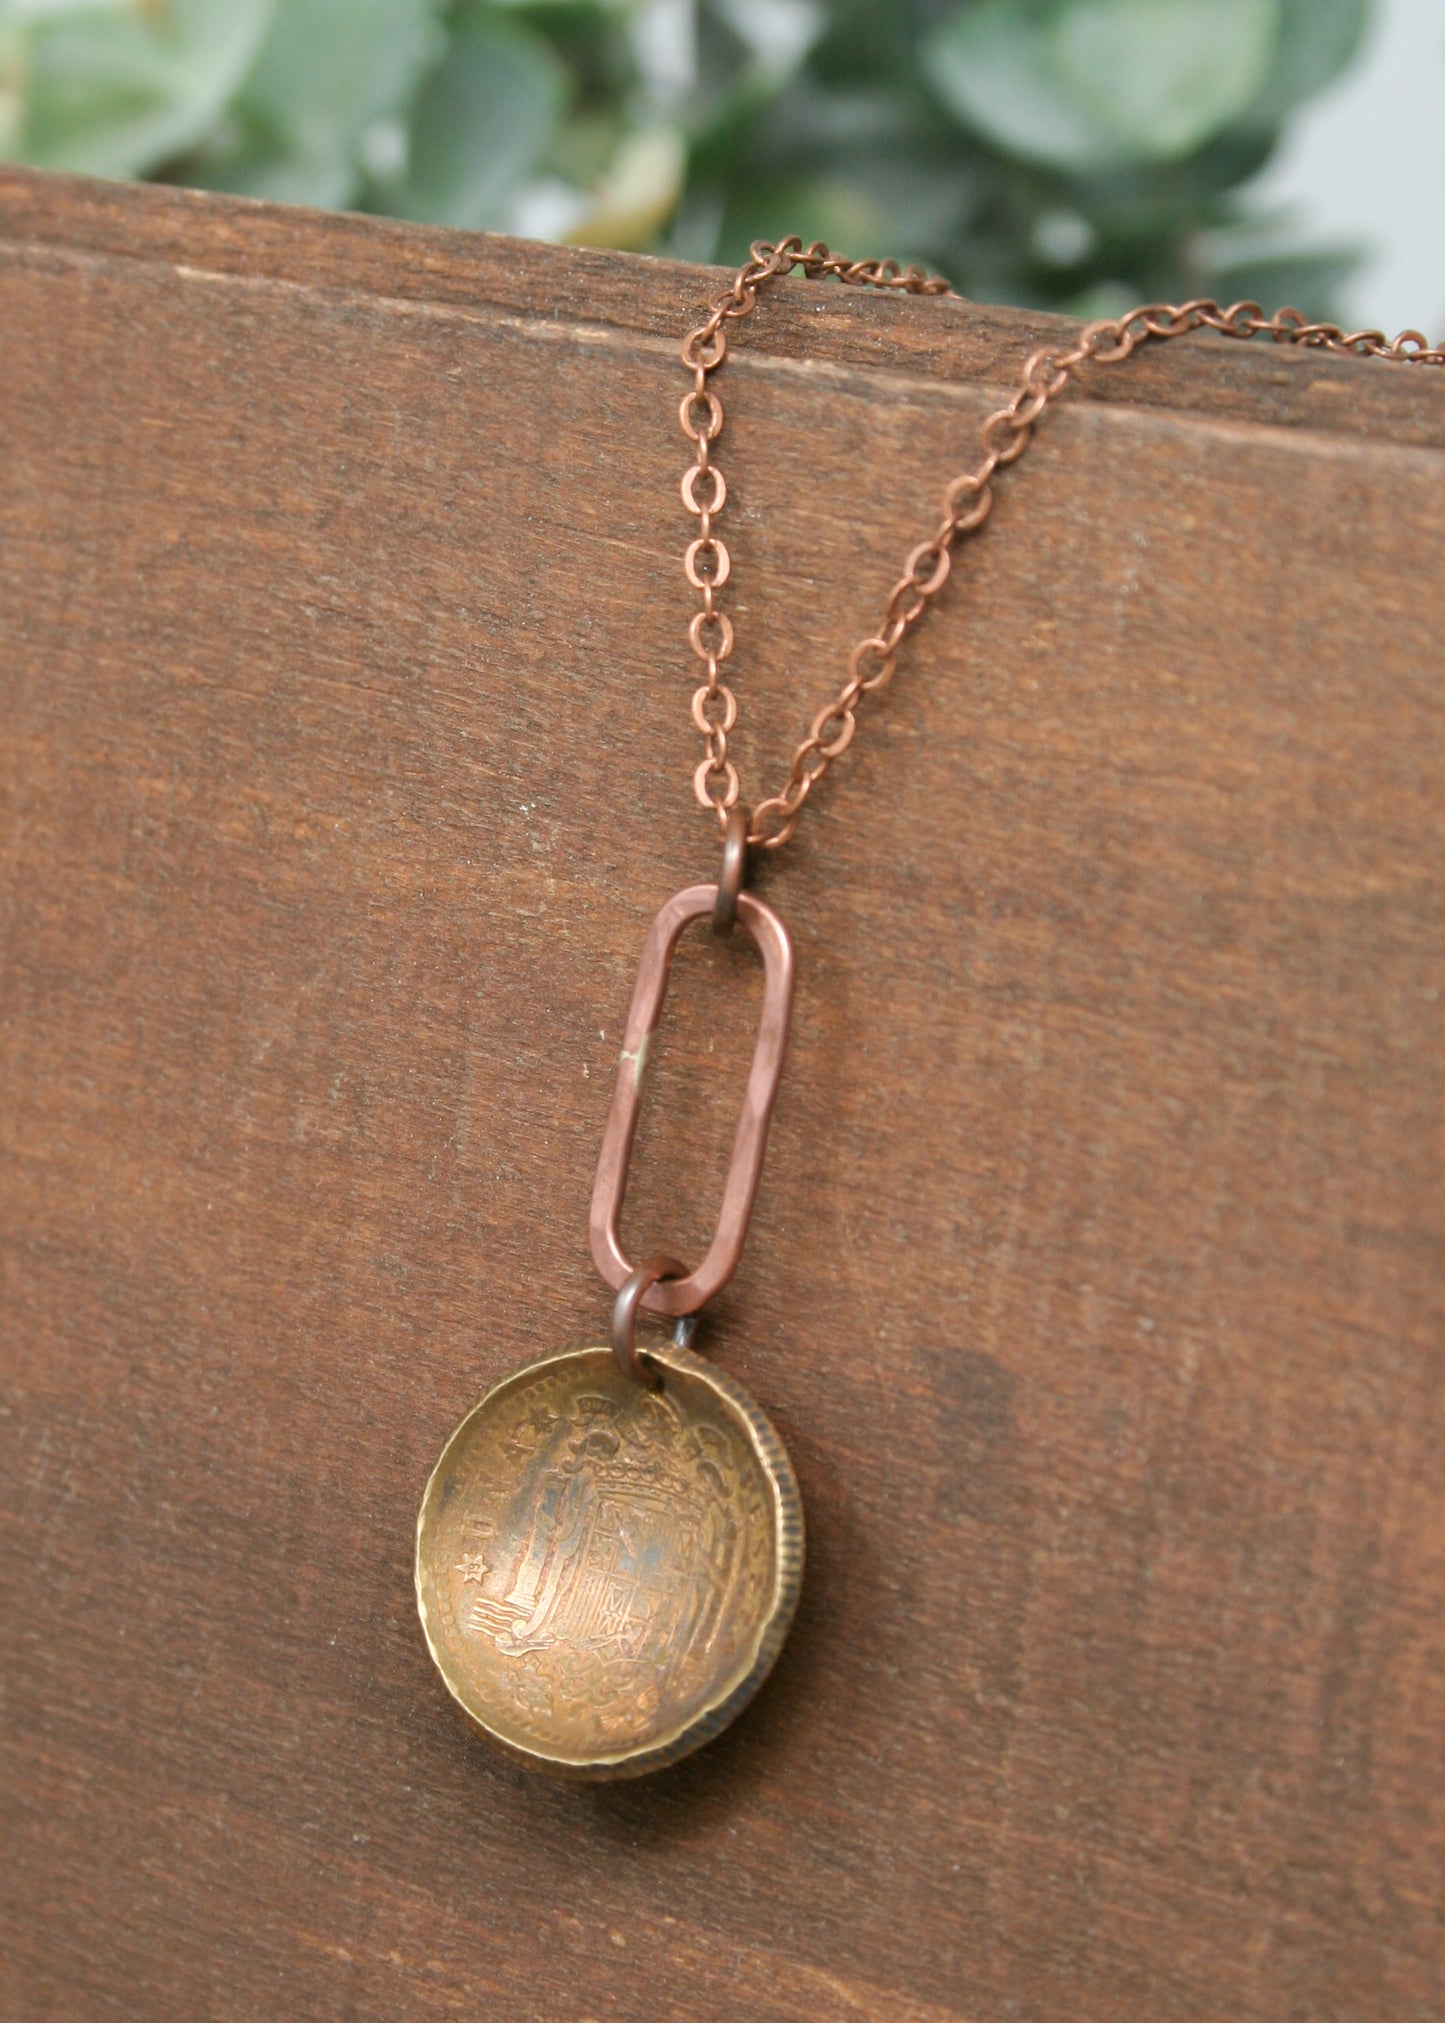 a necklace with a pendant hanging from it